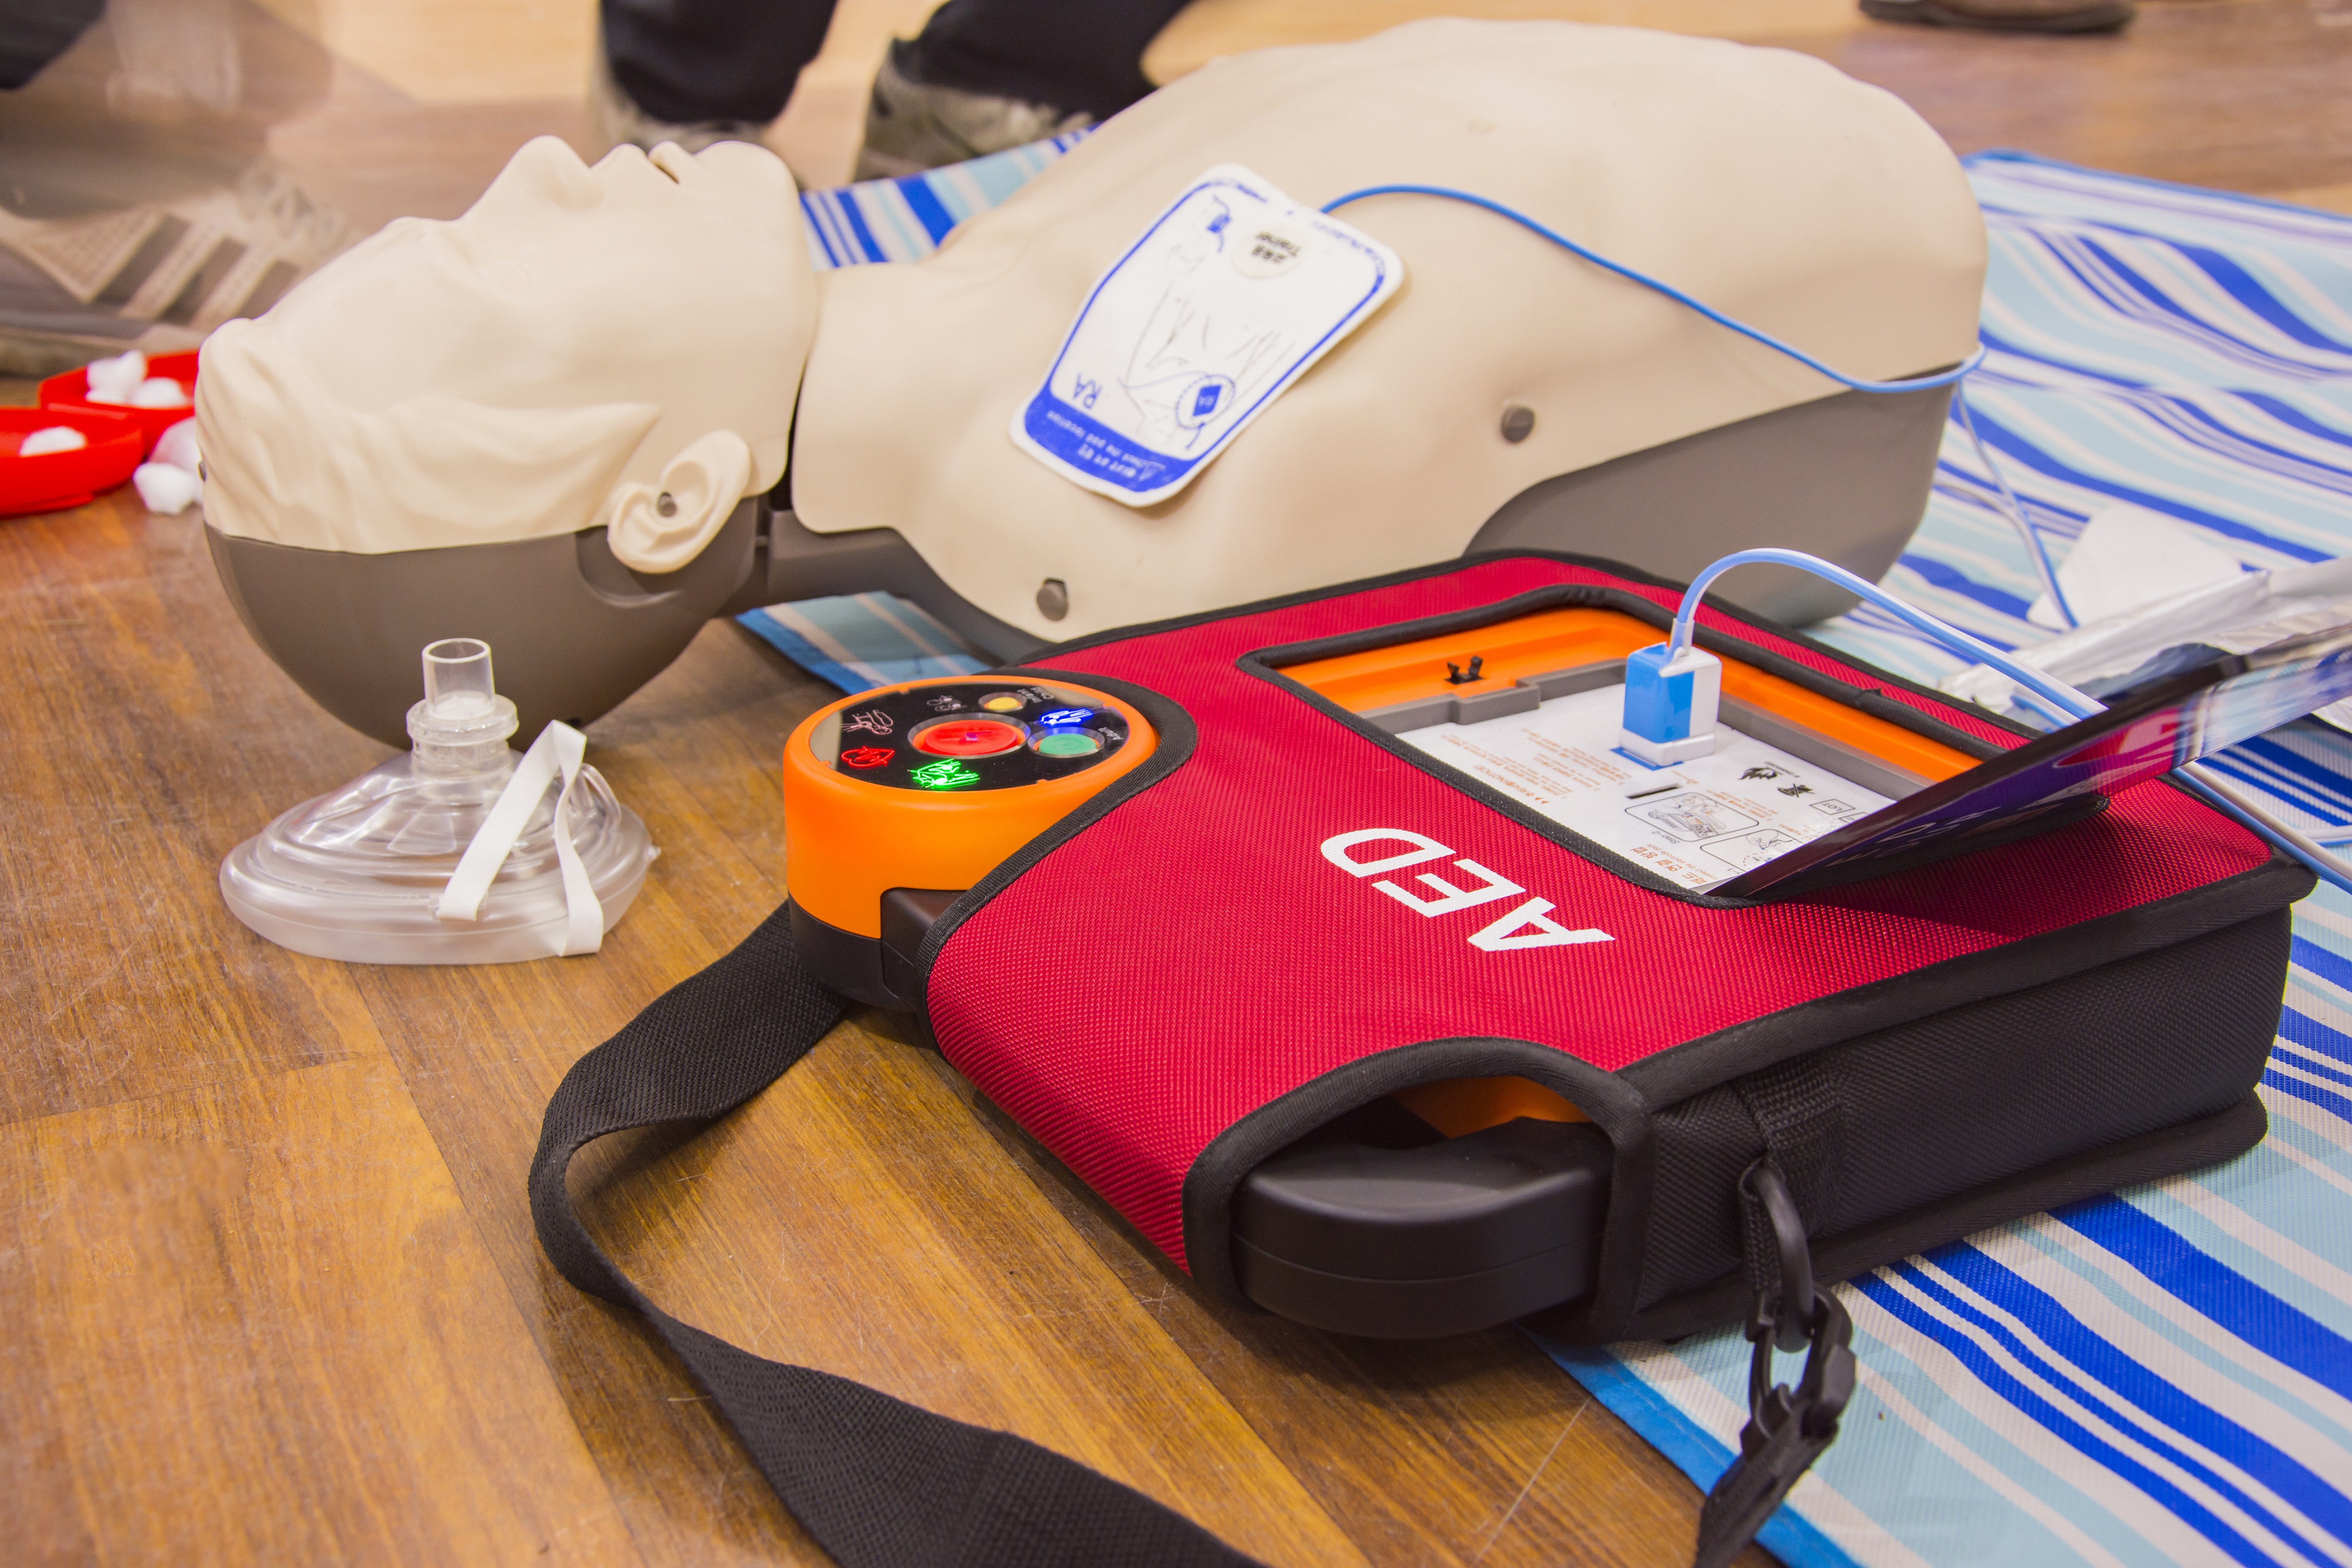 CPR AED First Aid Training Class September 24, 2022 in Tigard